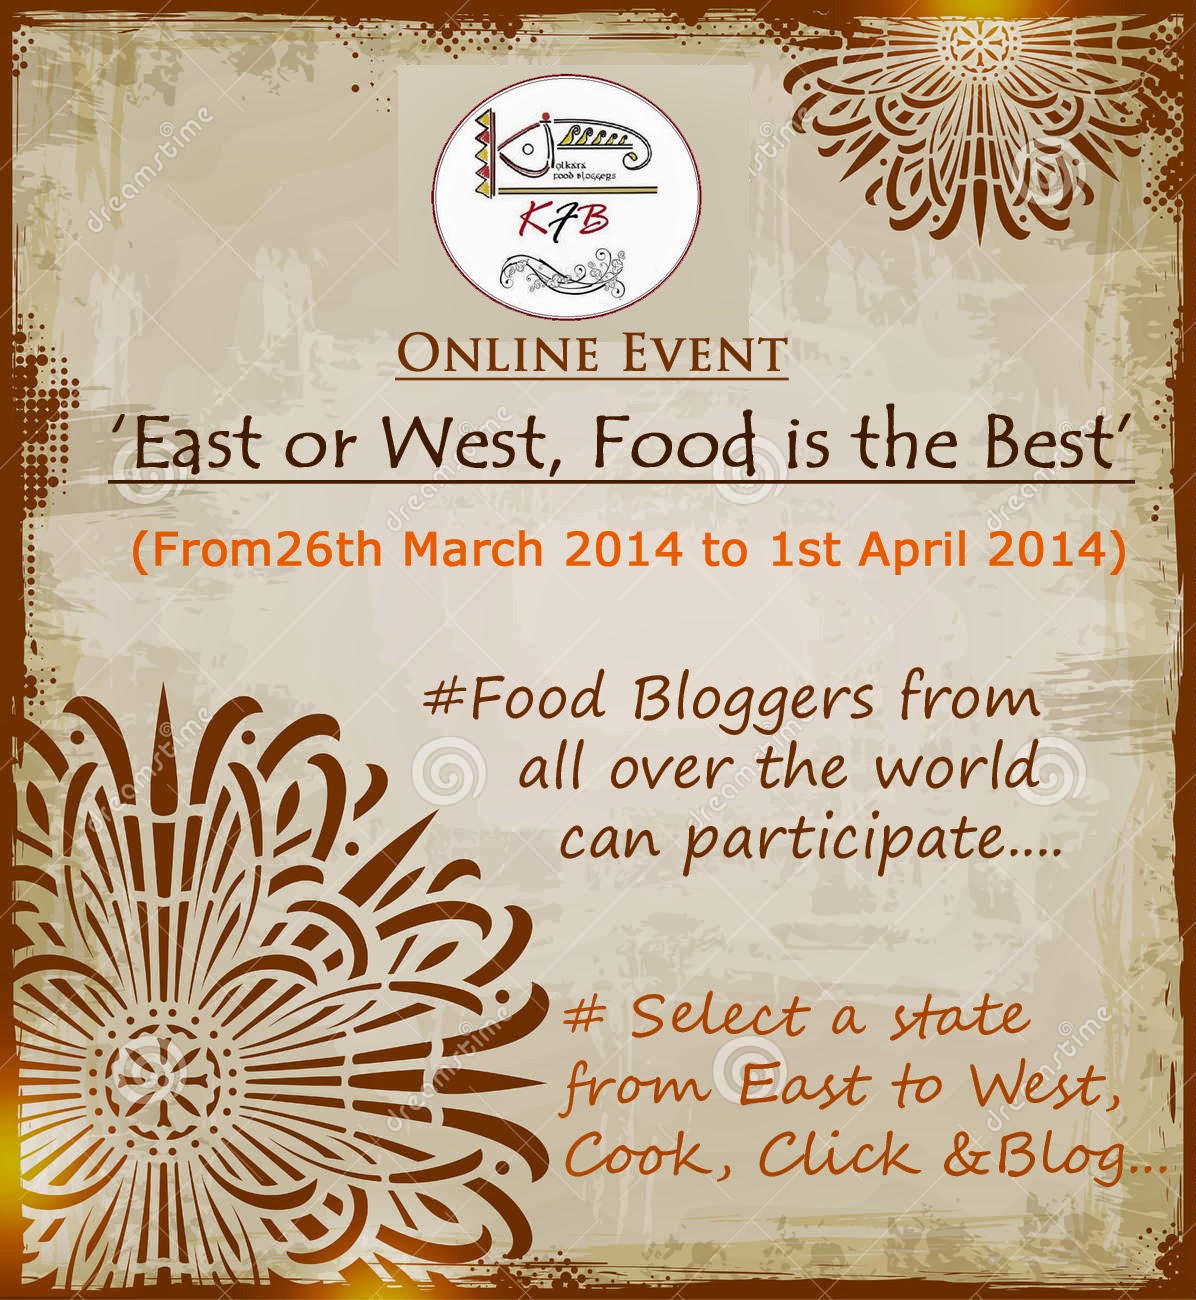 http://kolkatafoodbloggers.blogspot.in/2014/03/online-event-east-or-west-food-is-best.html